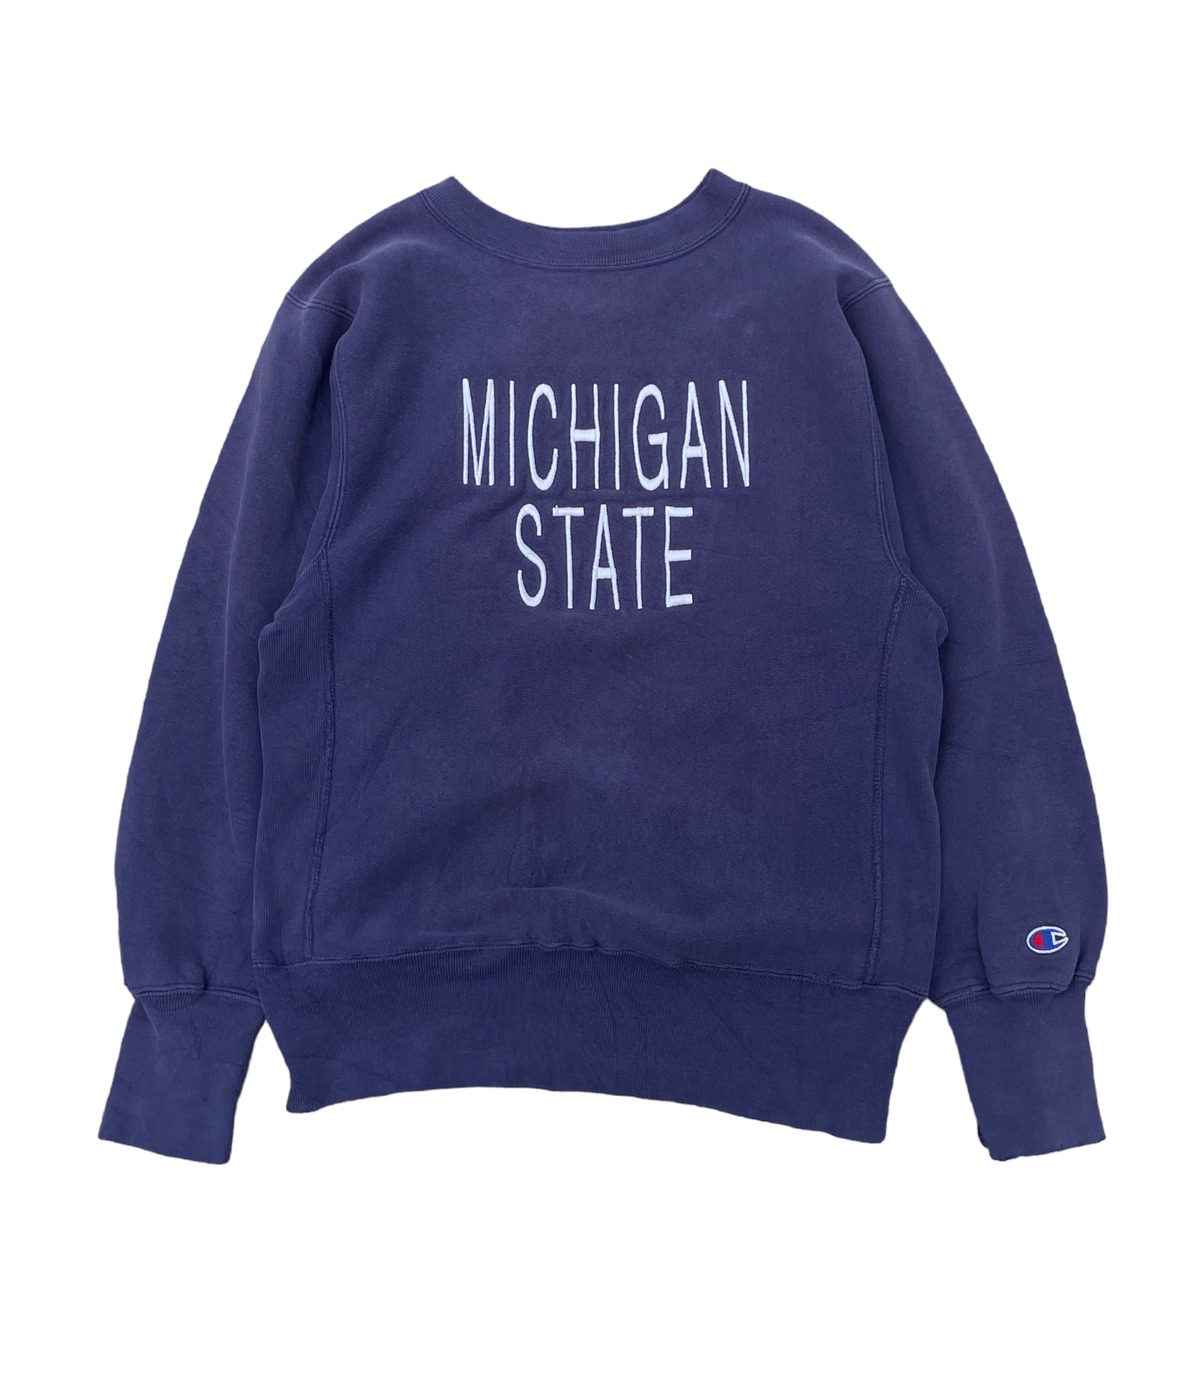 Vintage 90s M Champion Reverse Weave -MICHIGAN STATE- | BEGGARS  BANQUET公式通販サイト　古着・ヴィンテージ